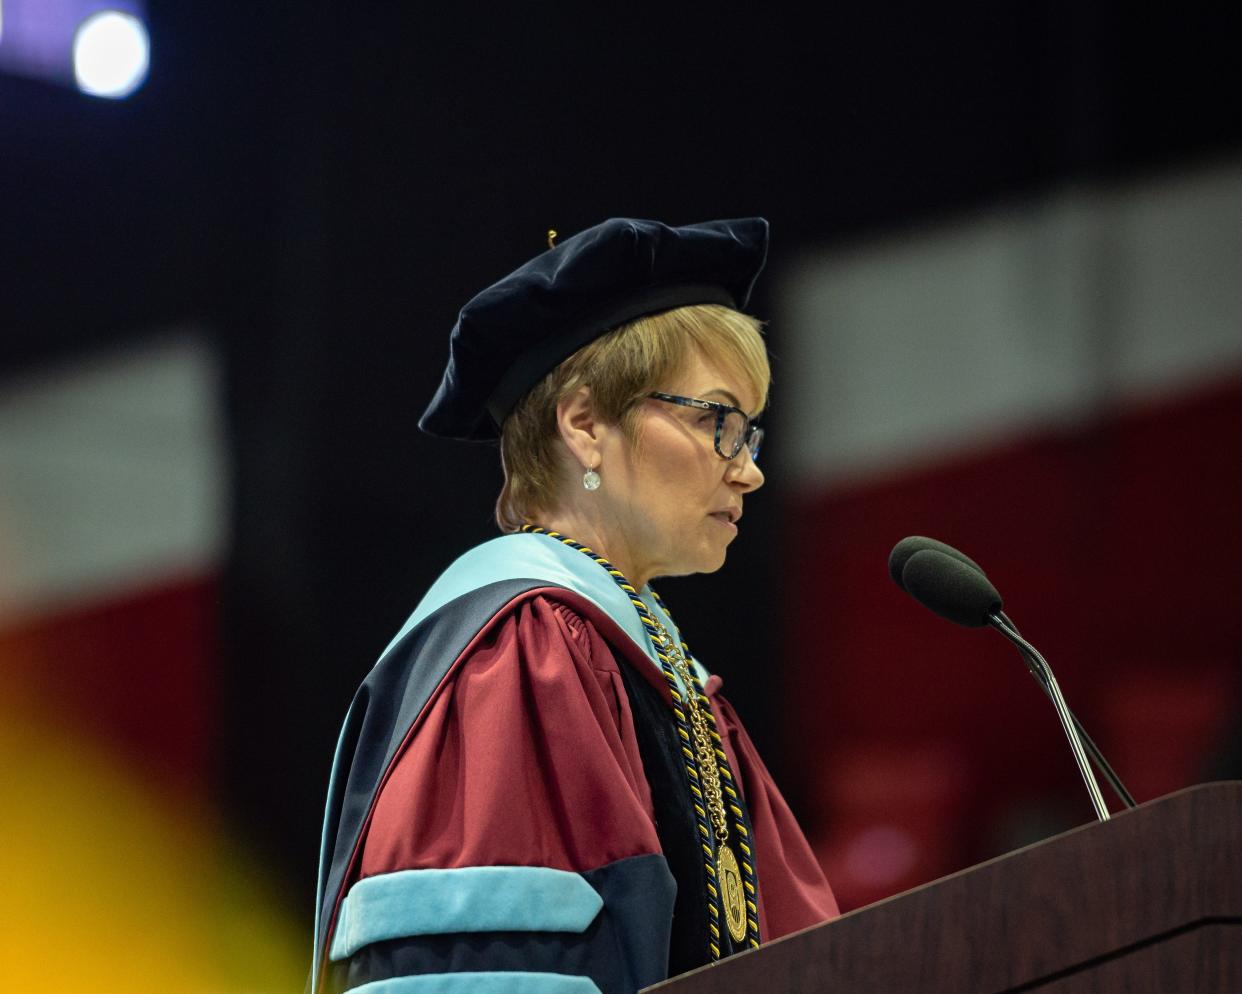 Laura Casamento, president of the University, delivers an opening and welcome speech during the 73rd Utica University undergraduate Commencement Ceremony at the Adirondack Bank Center in Utica on Thursday, May 12, 2022.